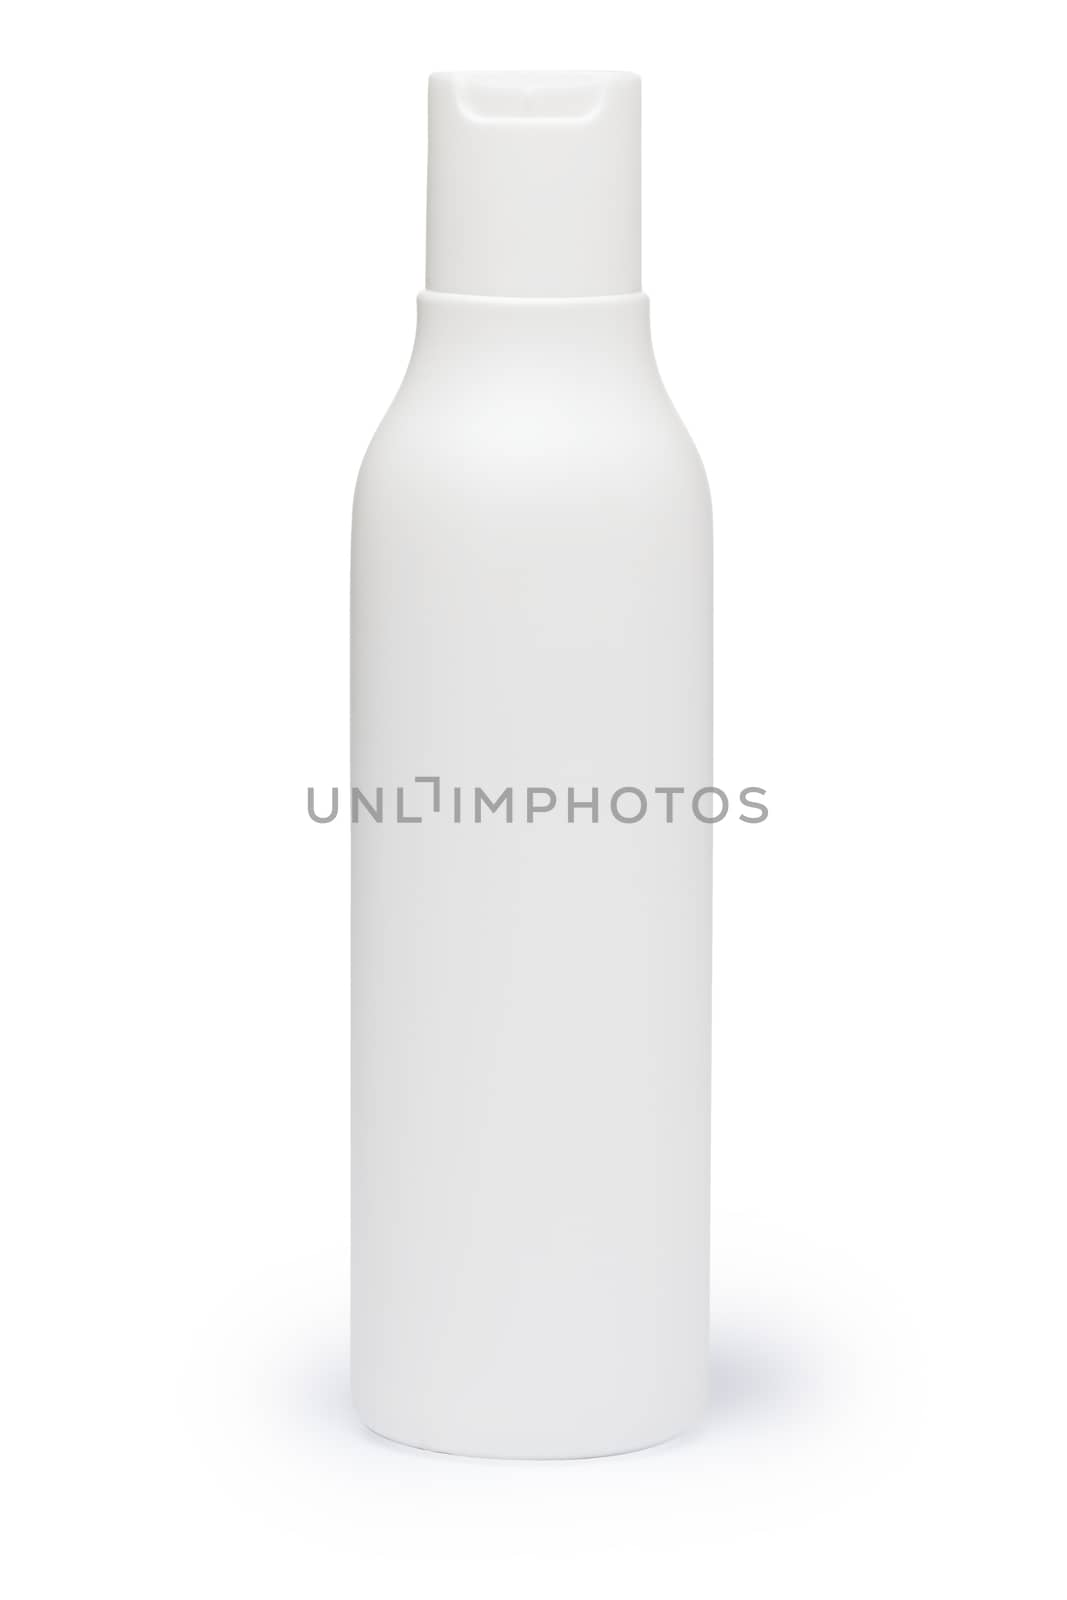 White plastic bottle with cap (mockup). Infinite depth of field, clipping paths for both bottle and its shadow